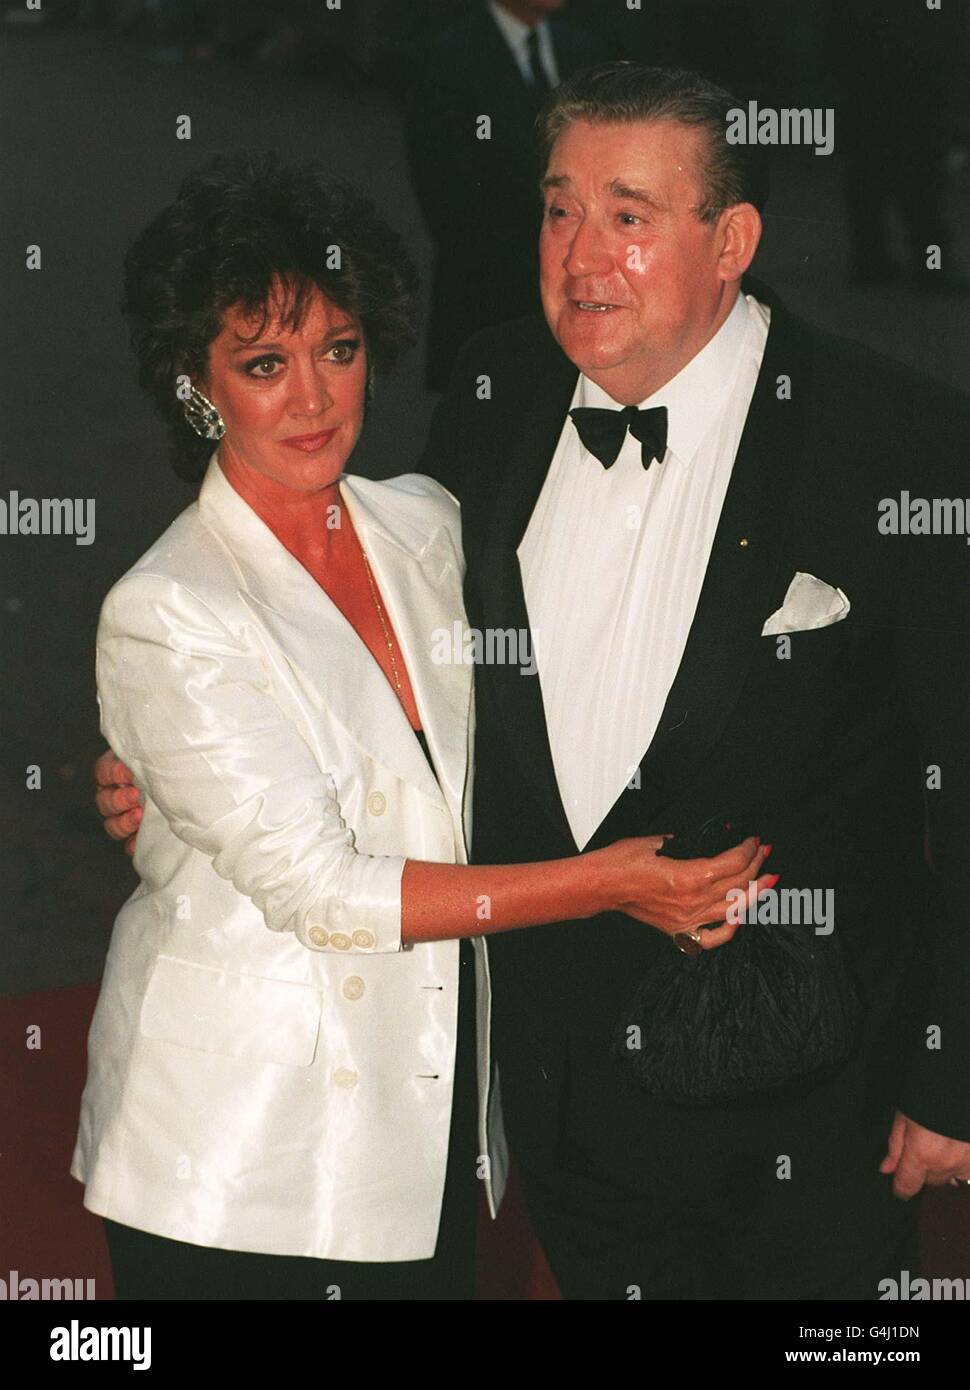 Library file 262144-9, dated 29.8.95. Bryan Mosely arrives for the National Television Awards with Coronation Street co-star Amanda Barrie, who plays Alma Baldwin in the Granada TV series . The actor died today (Tuesday), aged 67, just weeks after the final appearance in the series of his character, Alf Roberts. See PA story DEATH Mosely. Photo by Stefan Rousseau/PA Stock Photo